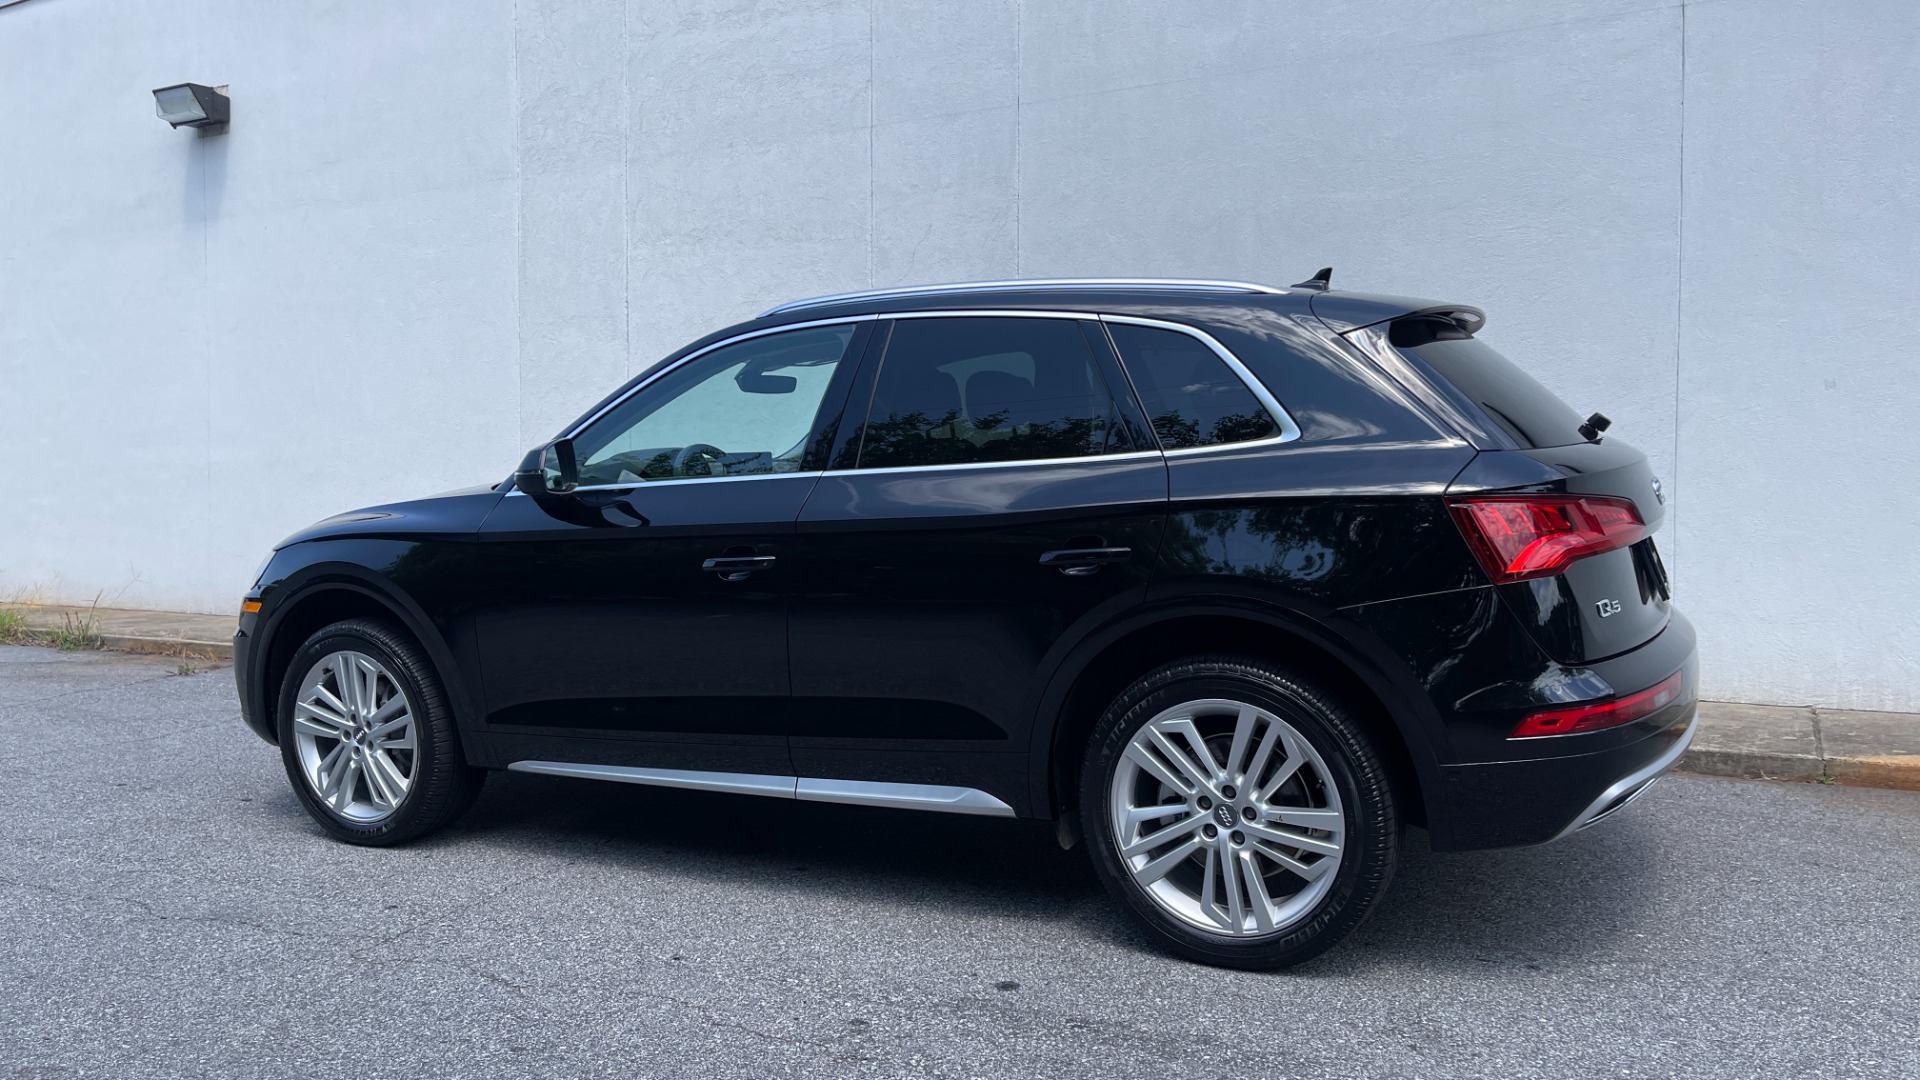 Used 2018 Audi Q5 PREMIUM PLUS / 20IN WHEELS / WARM WEATHER PACKAGE / AUDI CONNECT for sale $33,595 at Formula Imports in Charlotte NC 28227 7